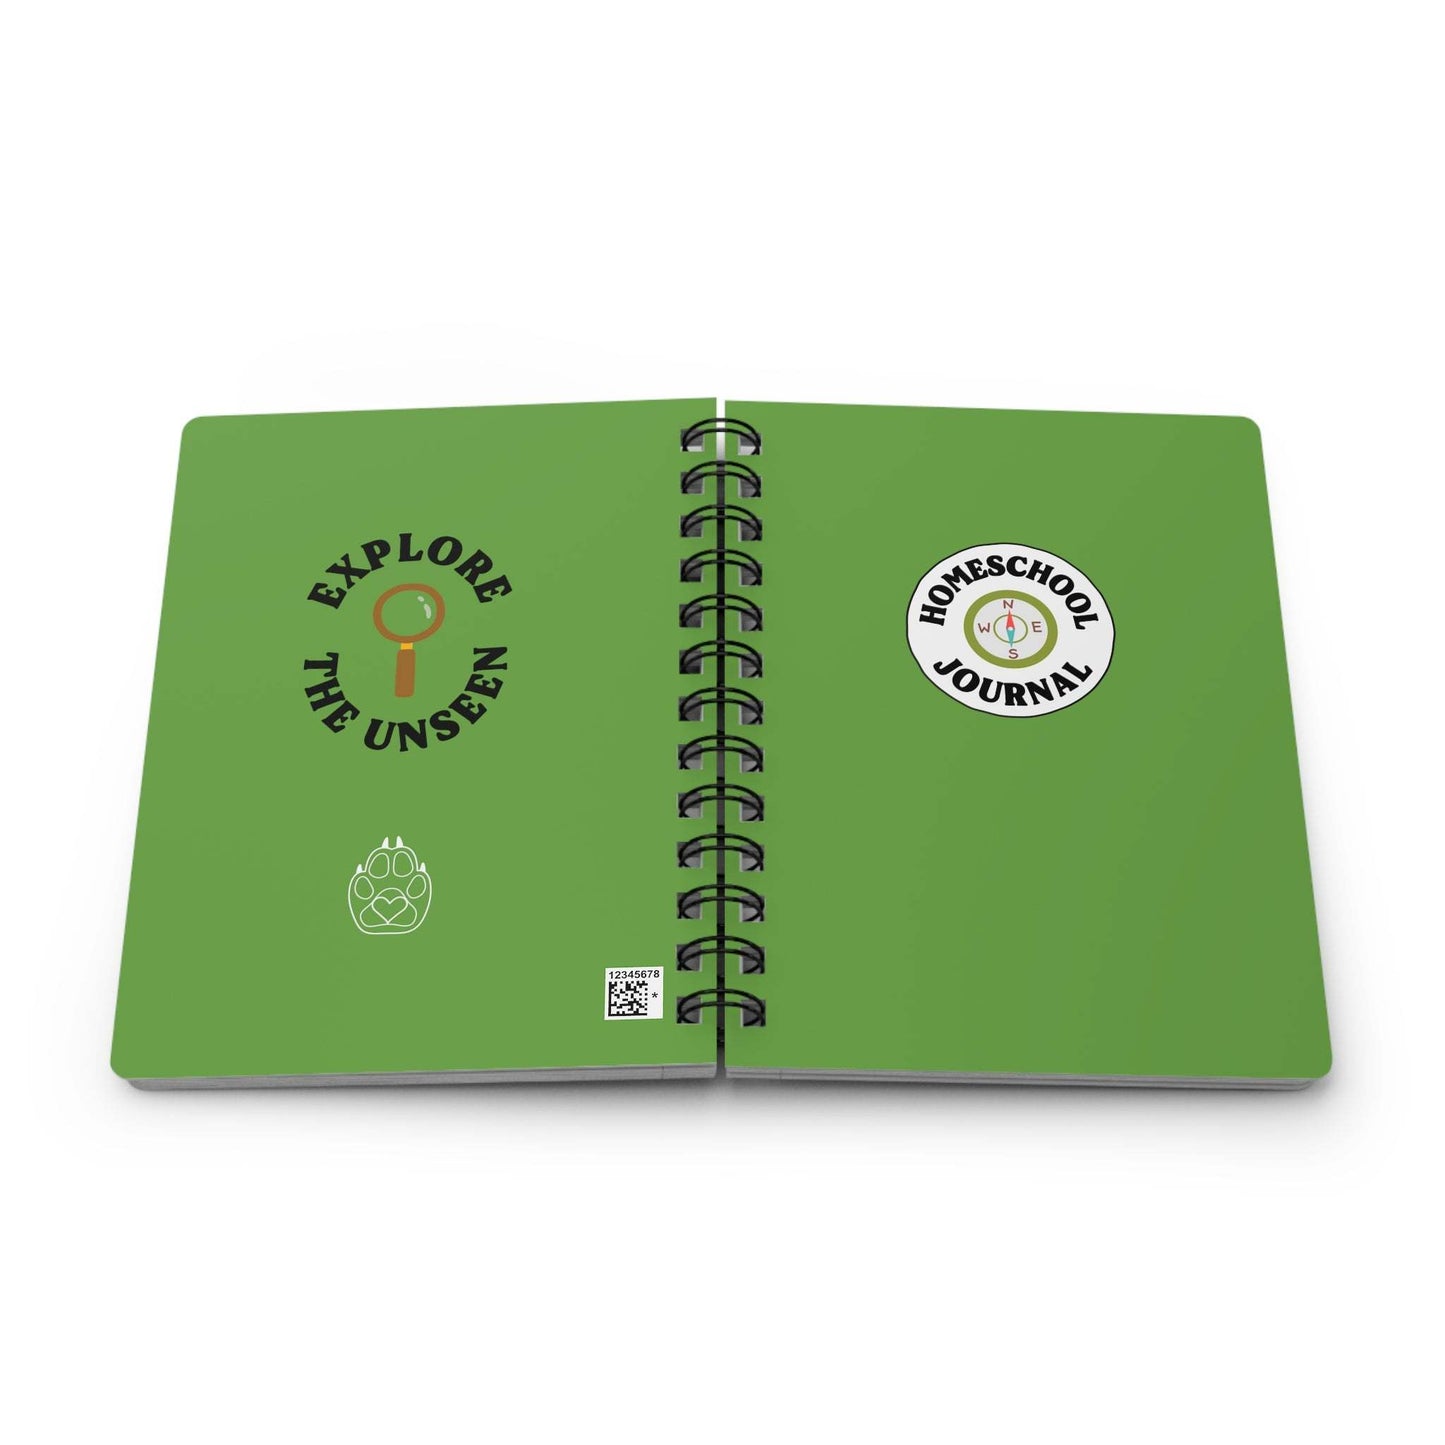 Compass Homeschool Spiral Bound JournalWolfe Paw DesignsCompass Homeschool Spiral Bound JournalGreen - Compass Homeschool lined journal 
Your homeschooler can now write in style with our themed lined journals made for kids just like yours!
Each color has its oCompass Homeschool Spiral Bound Journal